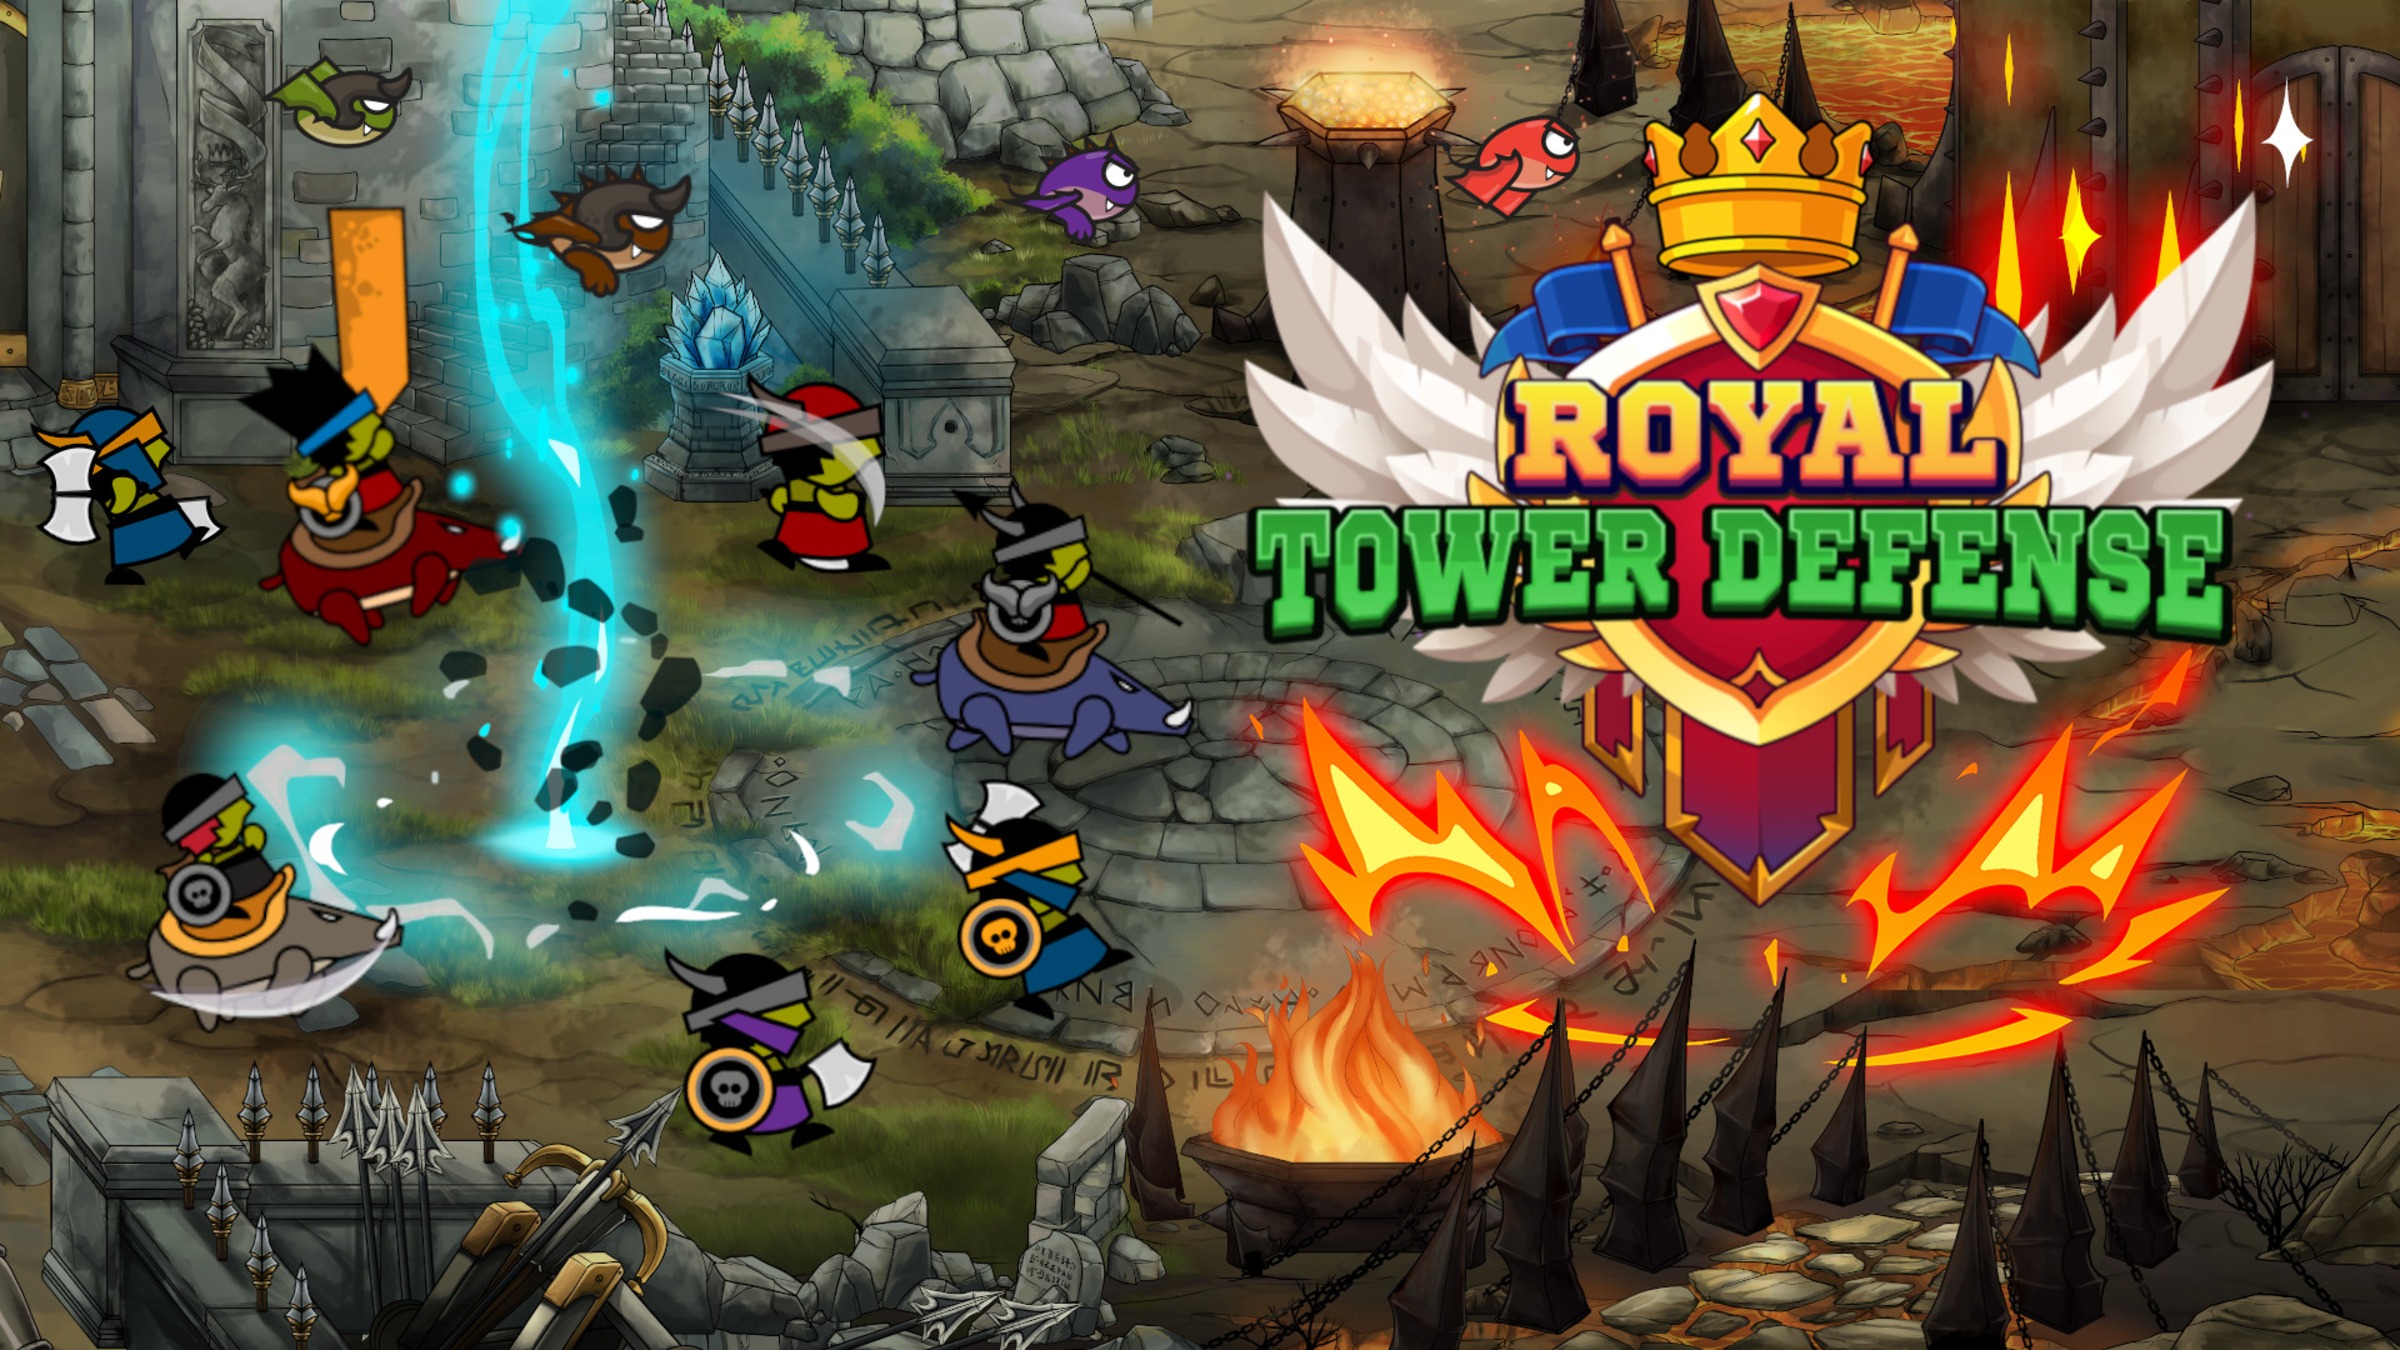 Royal Defense 2 - Invisible Threat - Play Thousands of Games - GameHouse